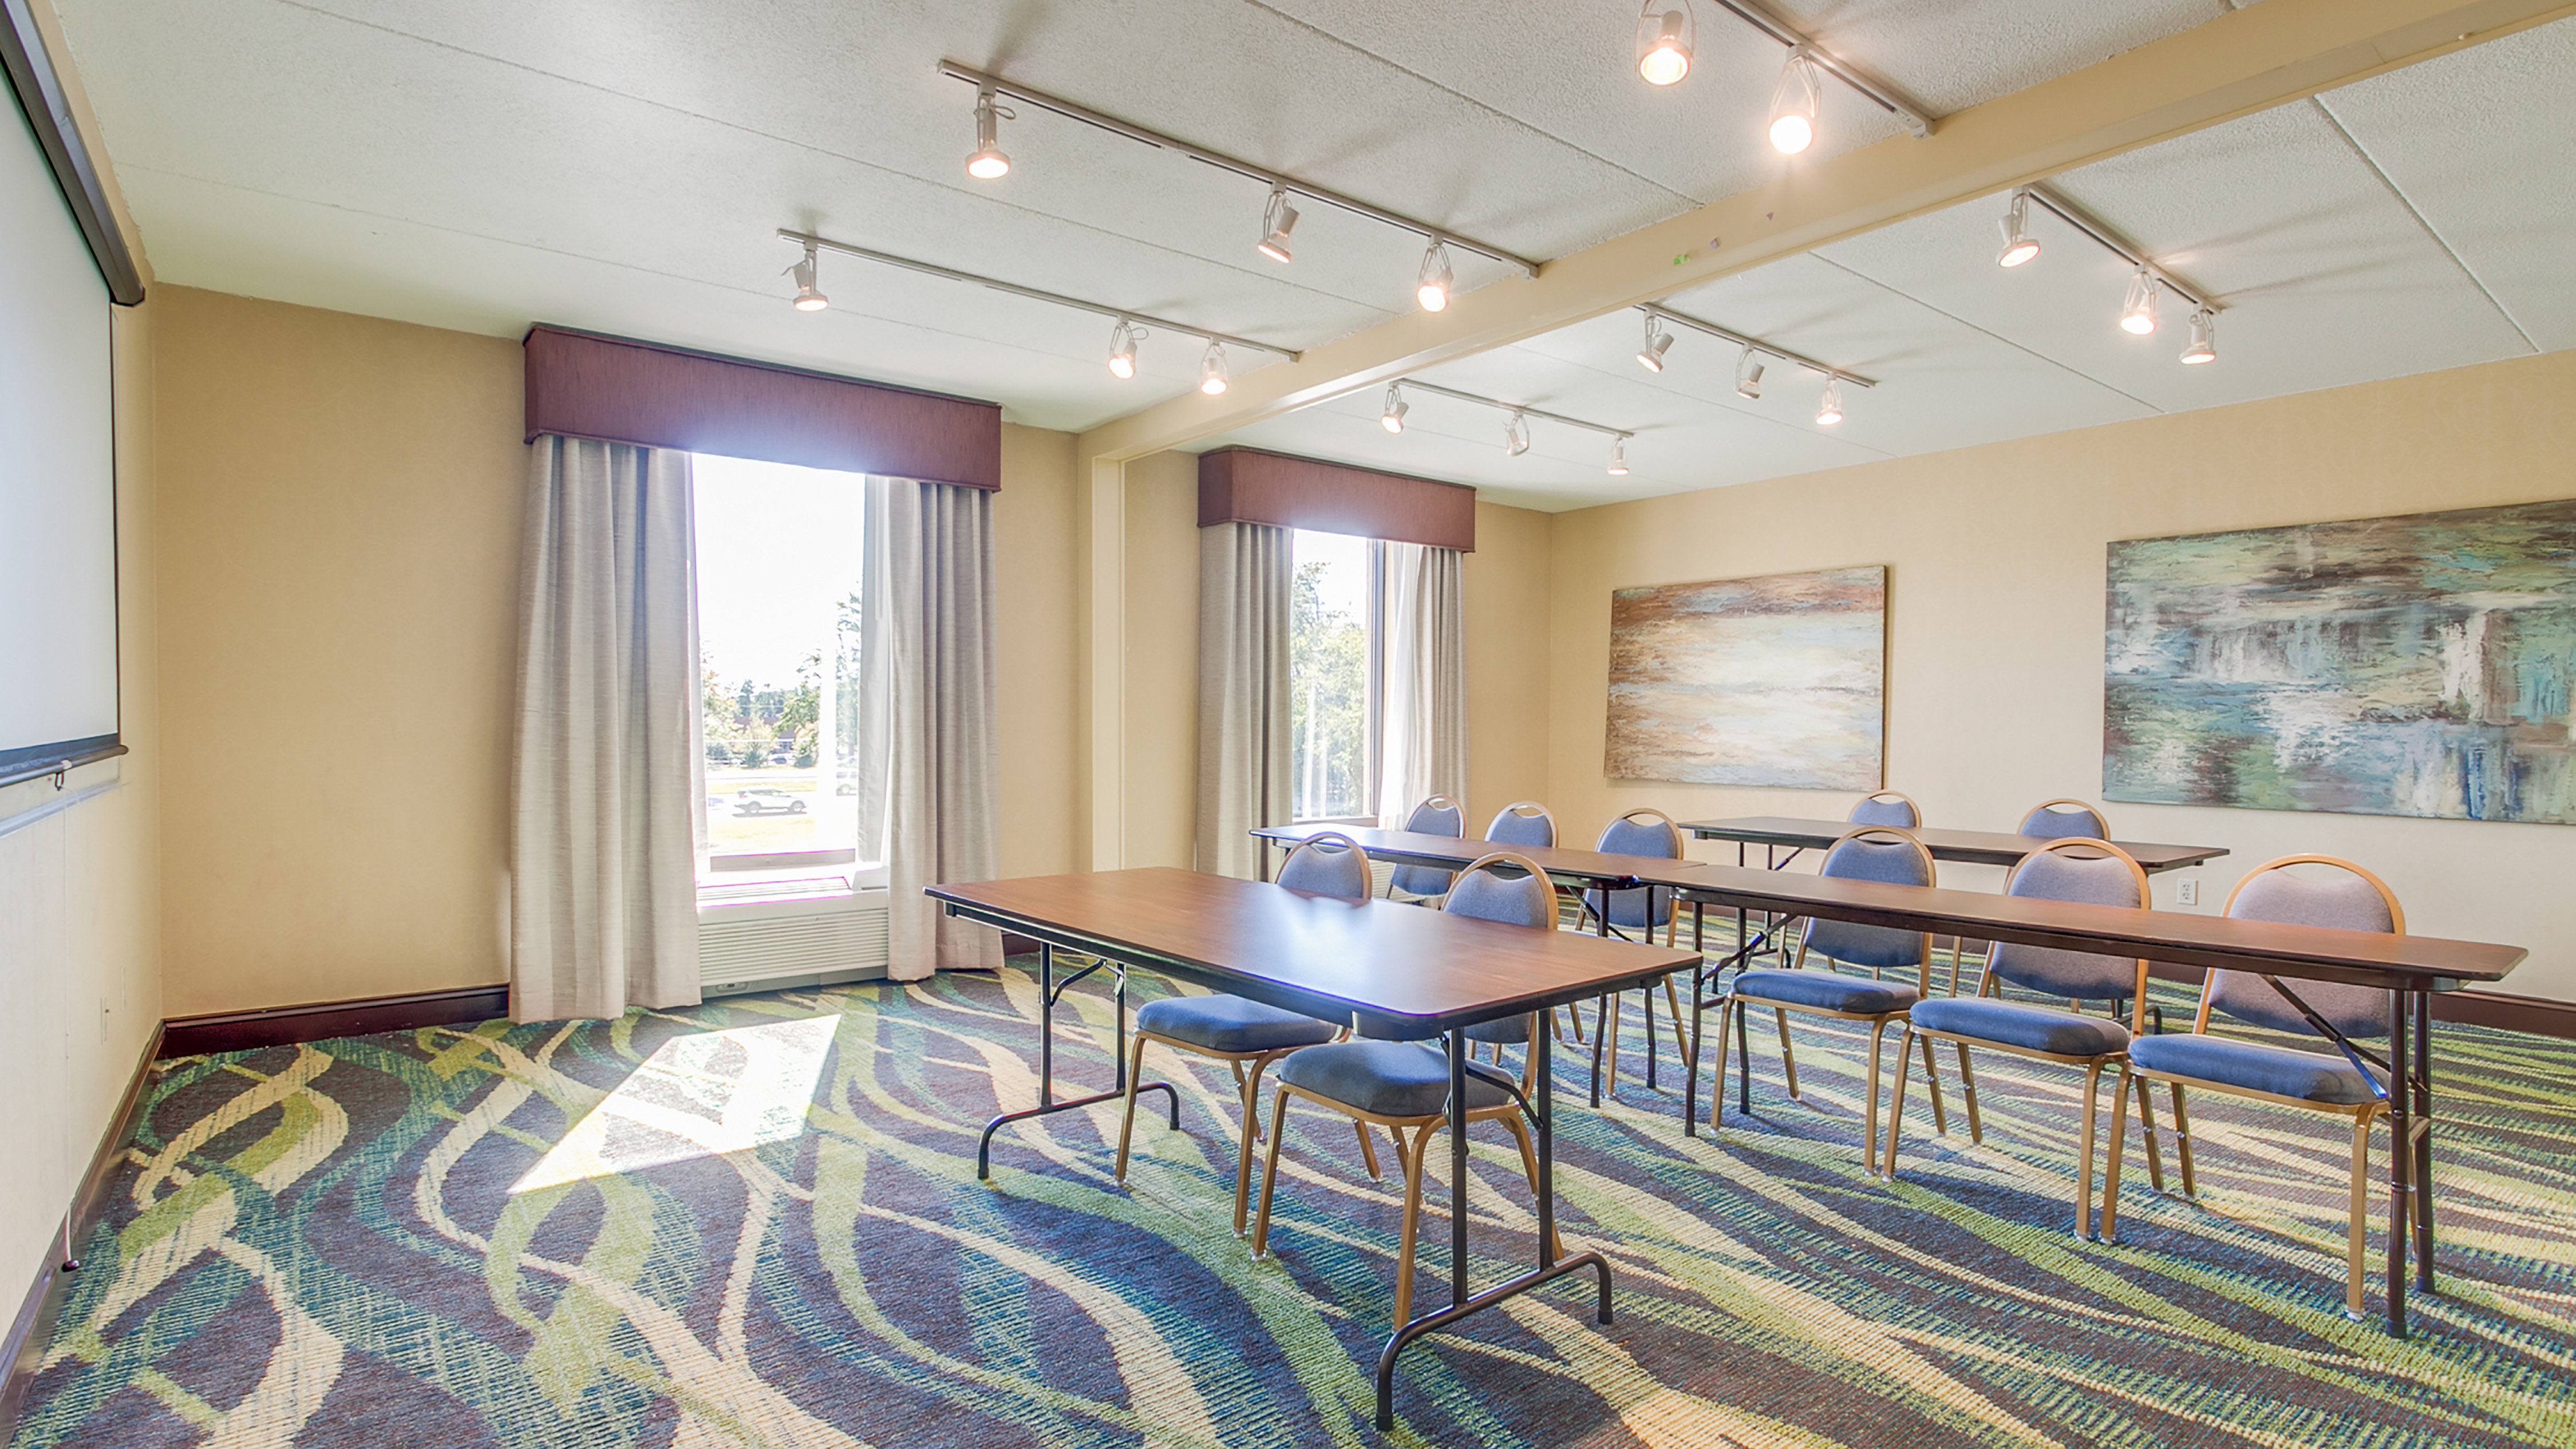 2 Meeting Rooms - hold up to 30-40 per room w/ Super Internet